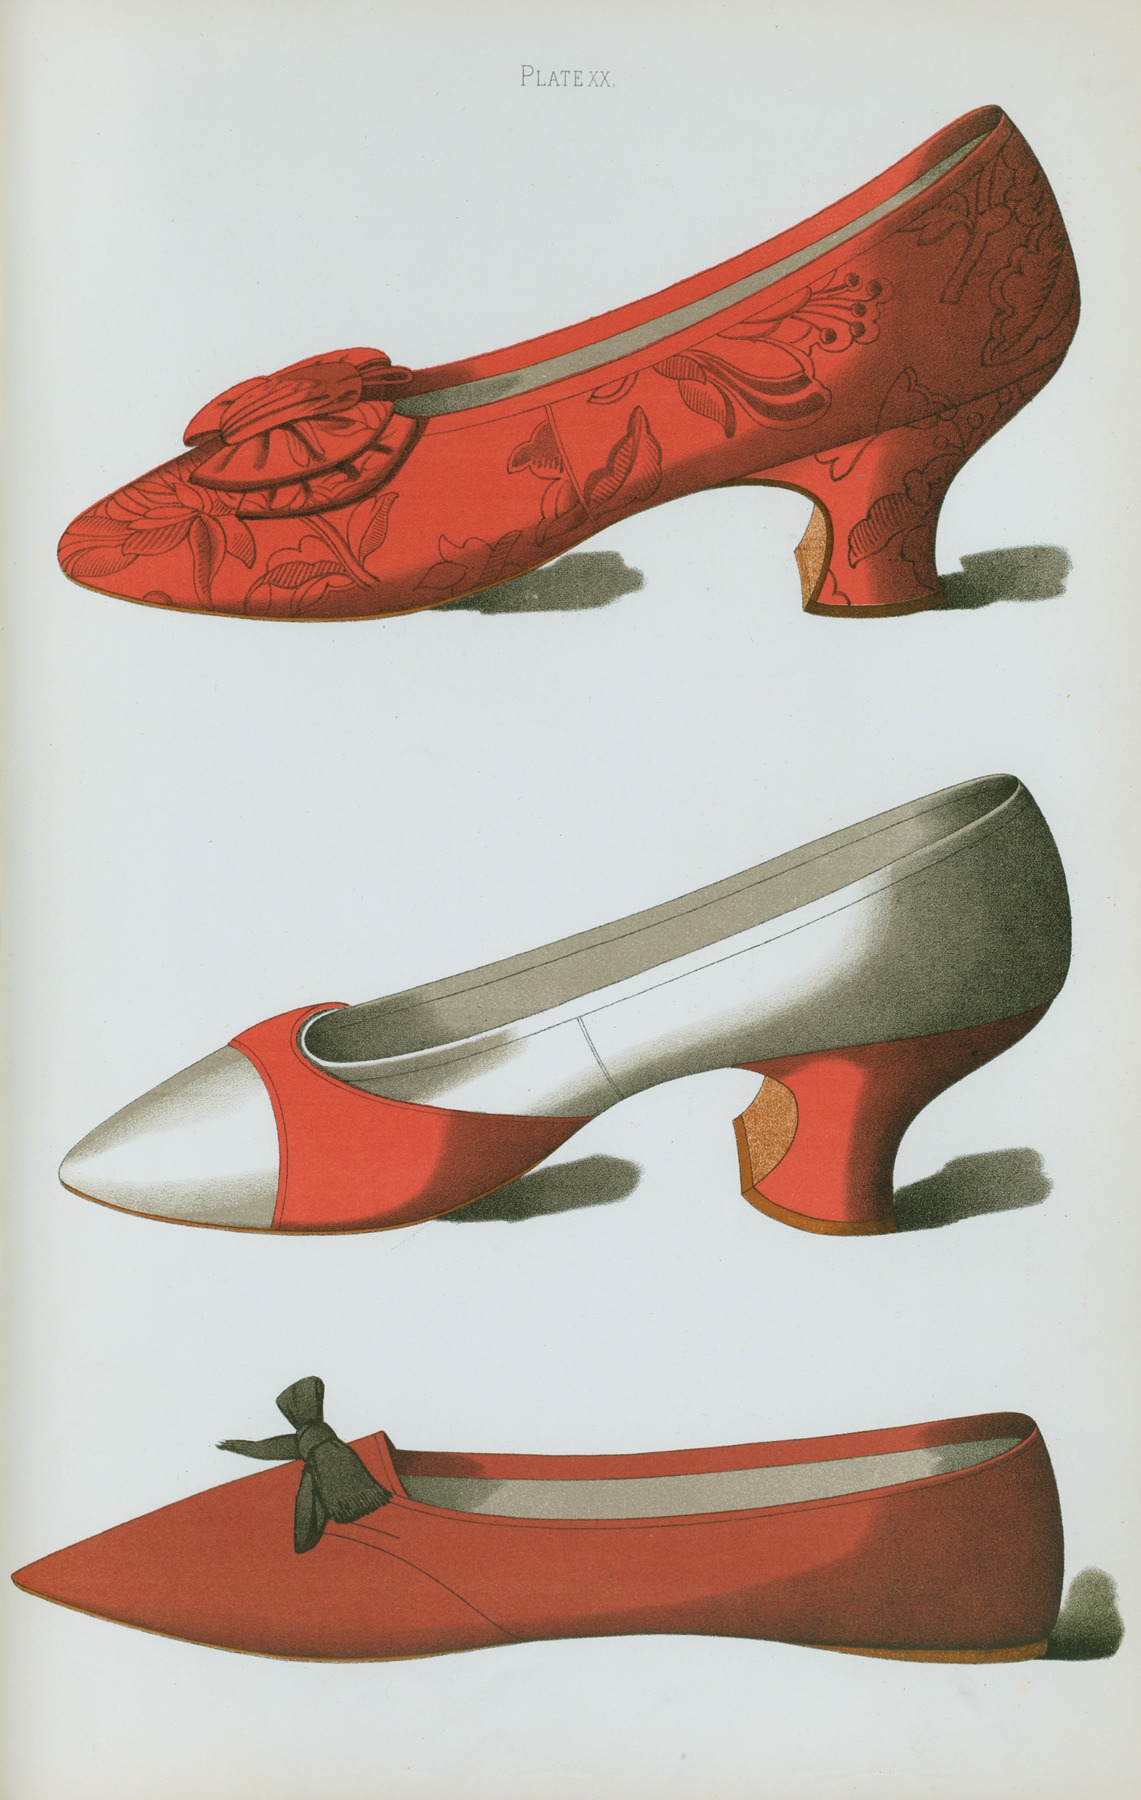 T. Watson Greig - Brocade shoe; red and white satin shoe; shoe belonging to Rosa Anderson, a fair maid of Perth